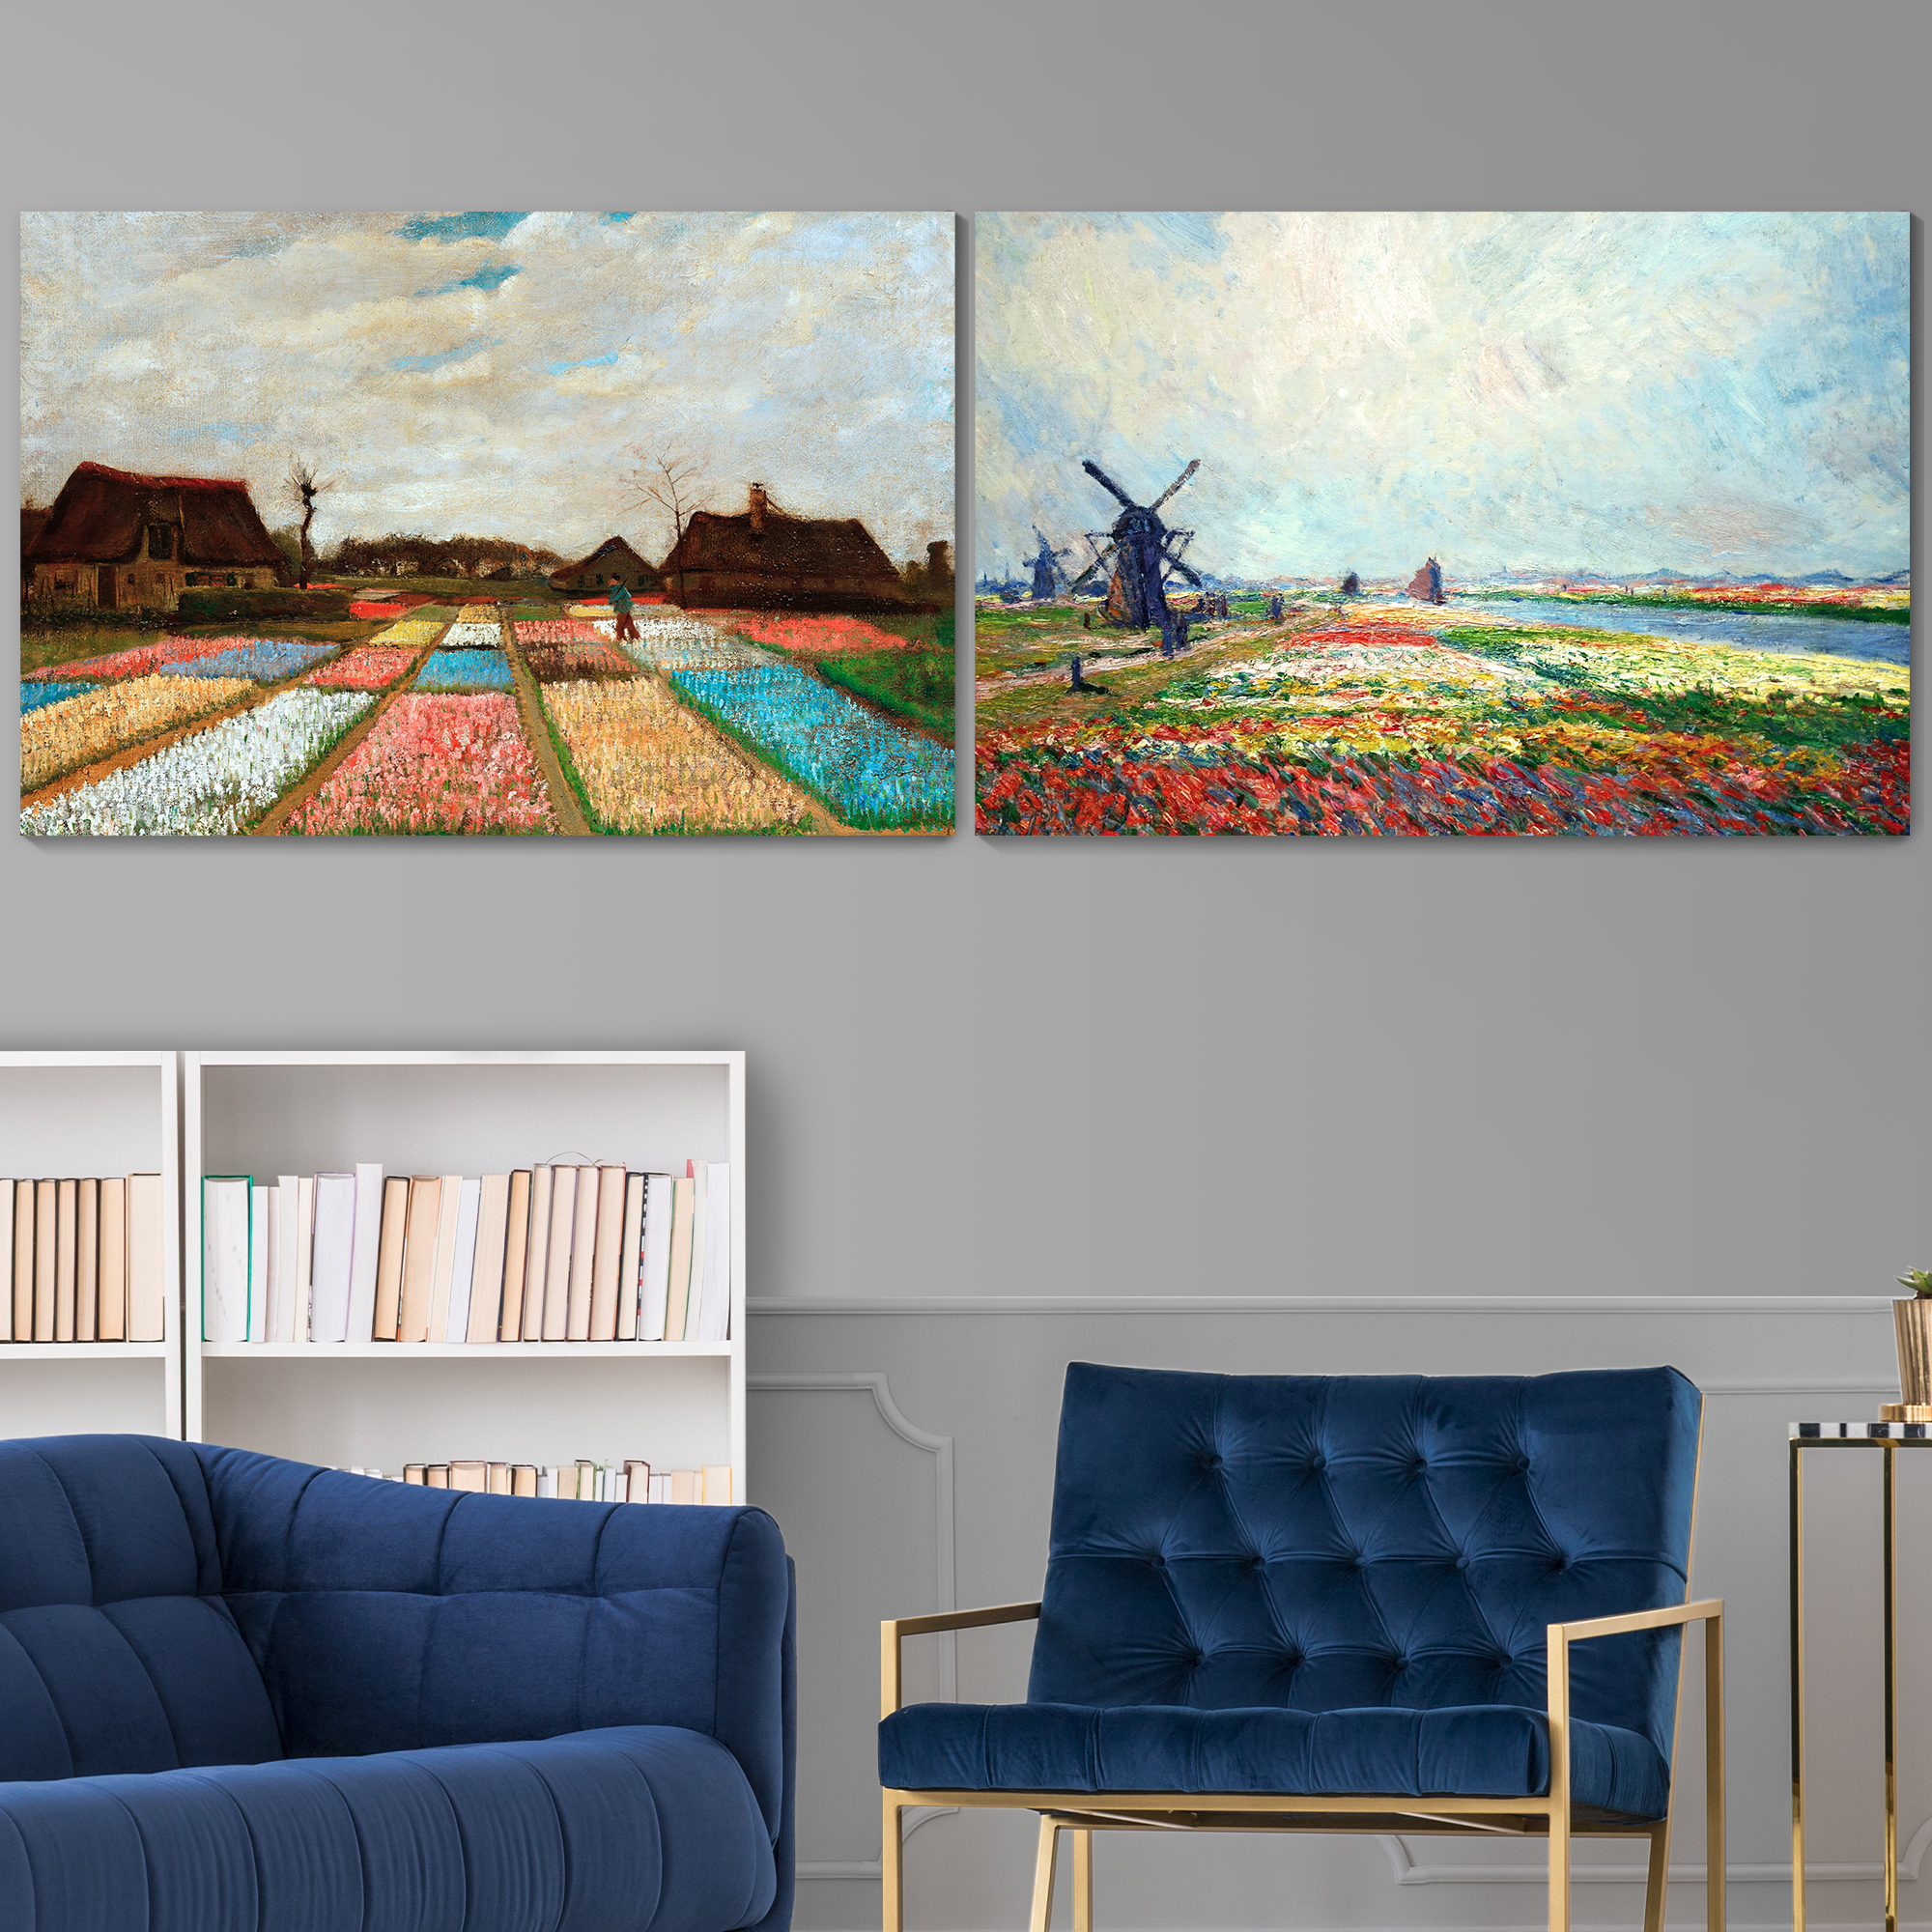 Wall26 - Tulip Fields near The Hague/Bulb Fields by Vincent Van Gogh - Oil Painting Reproduction in Set of 2 | Canvas Prints Wall Art, Ready to Hang - 16